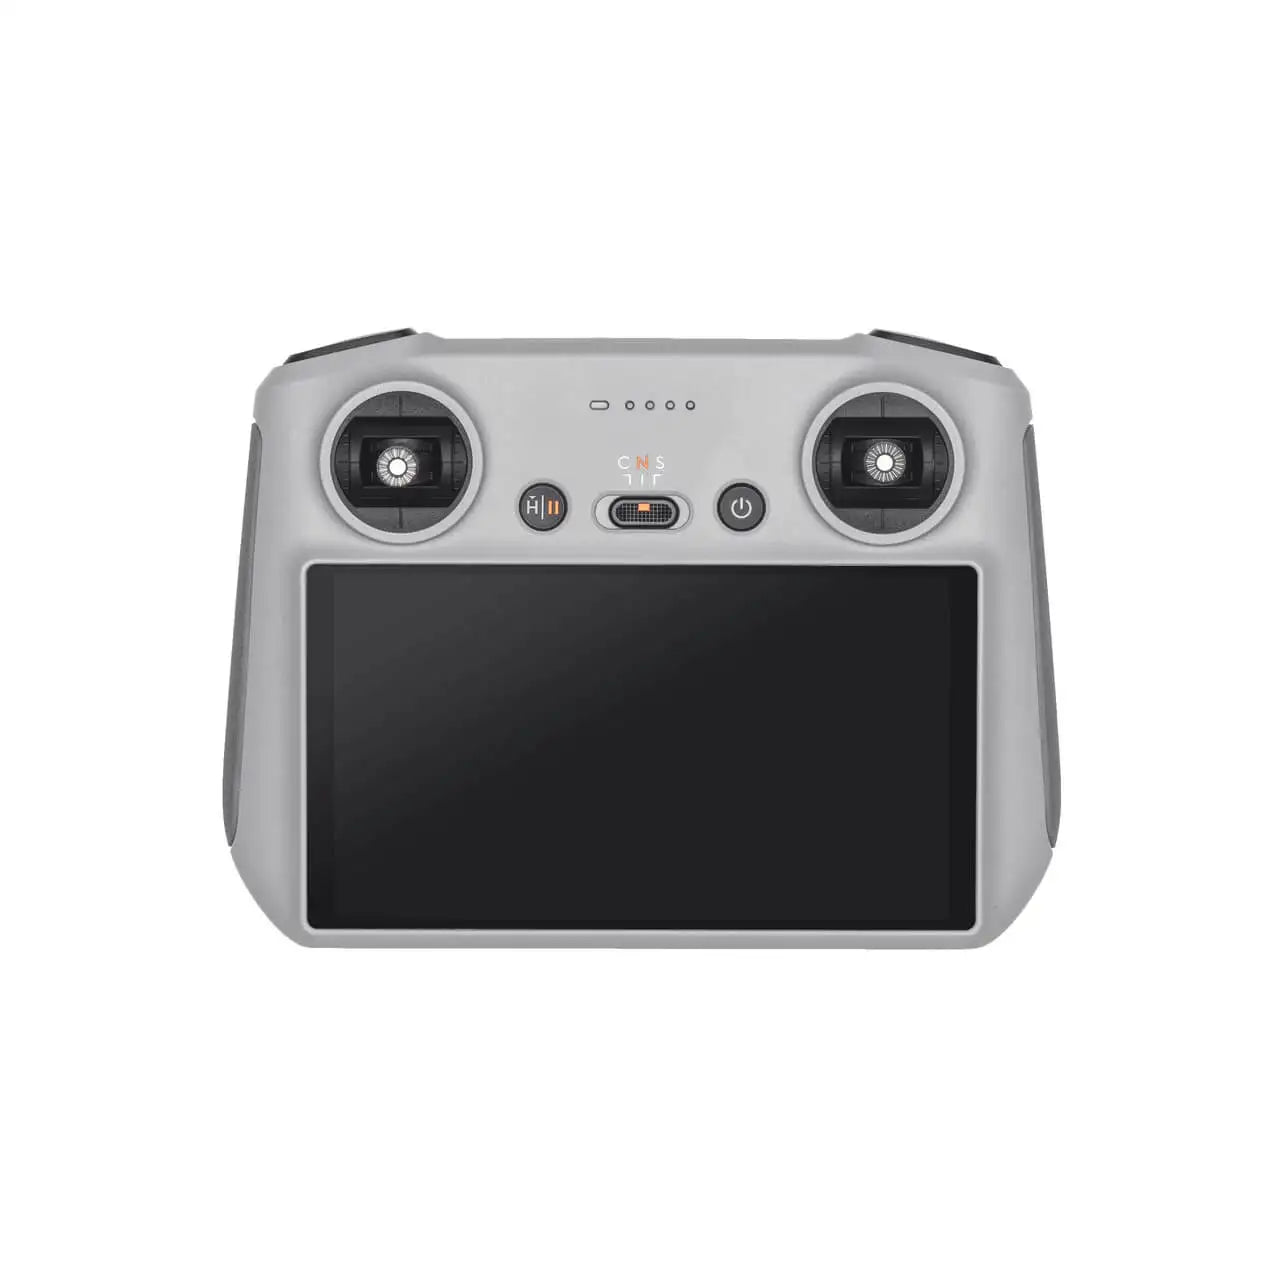 DJI RC Remote Controller, DJI RC will switch to the corresponding video transmission technology when connected to other compatible drone